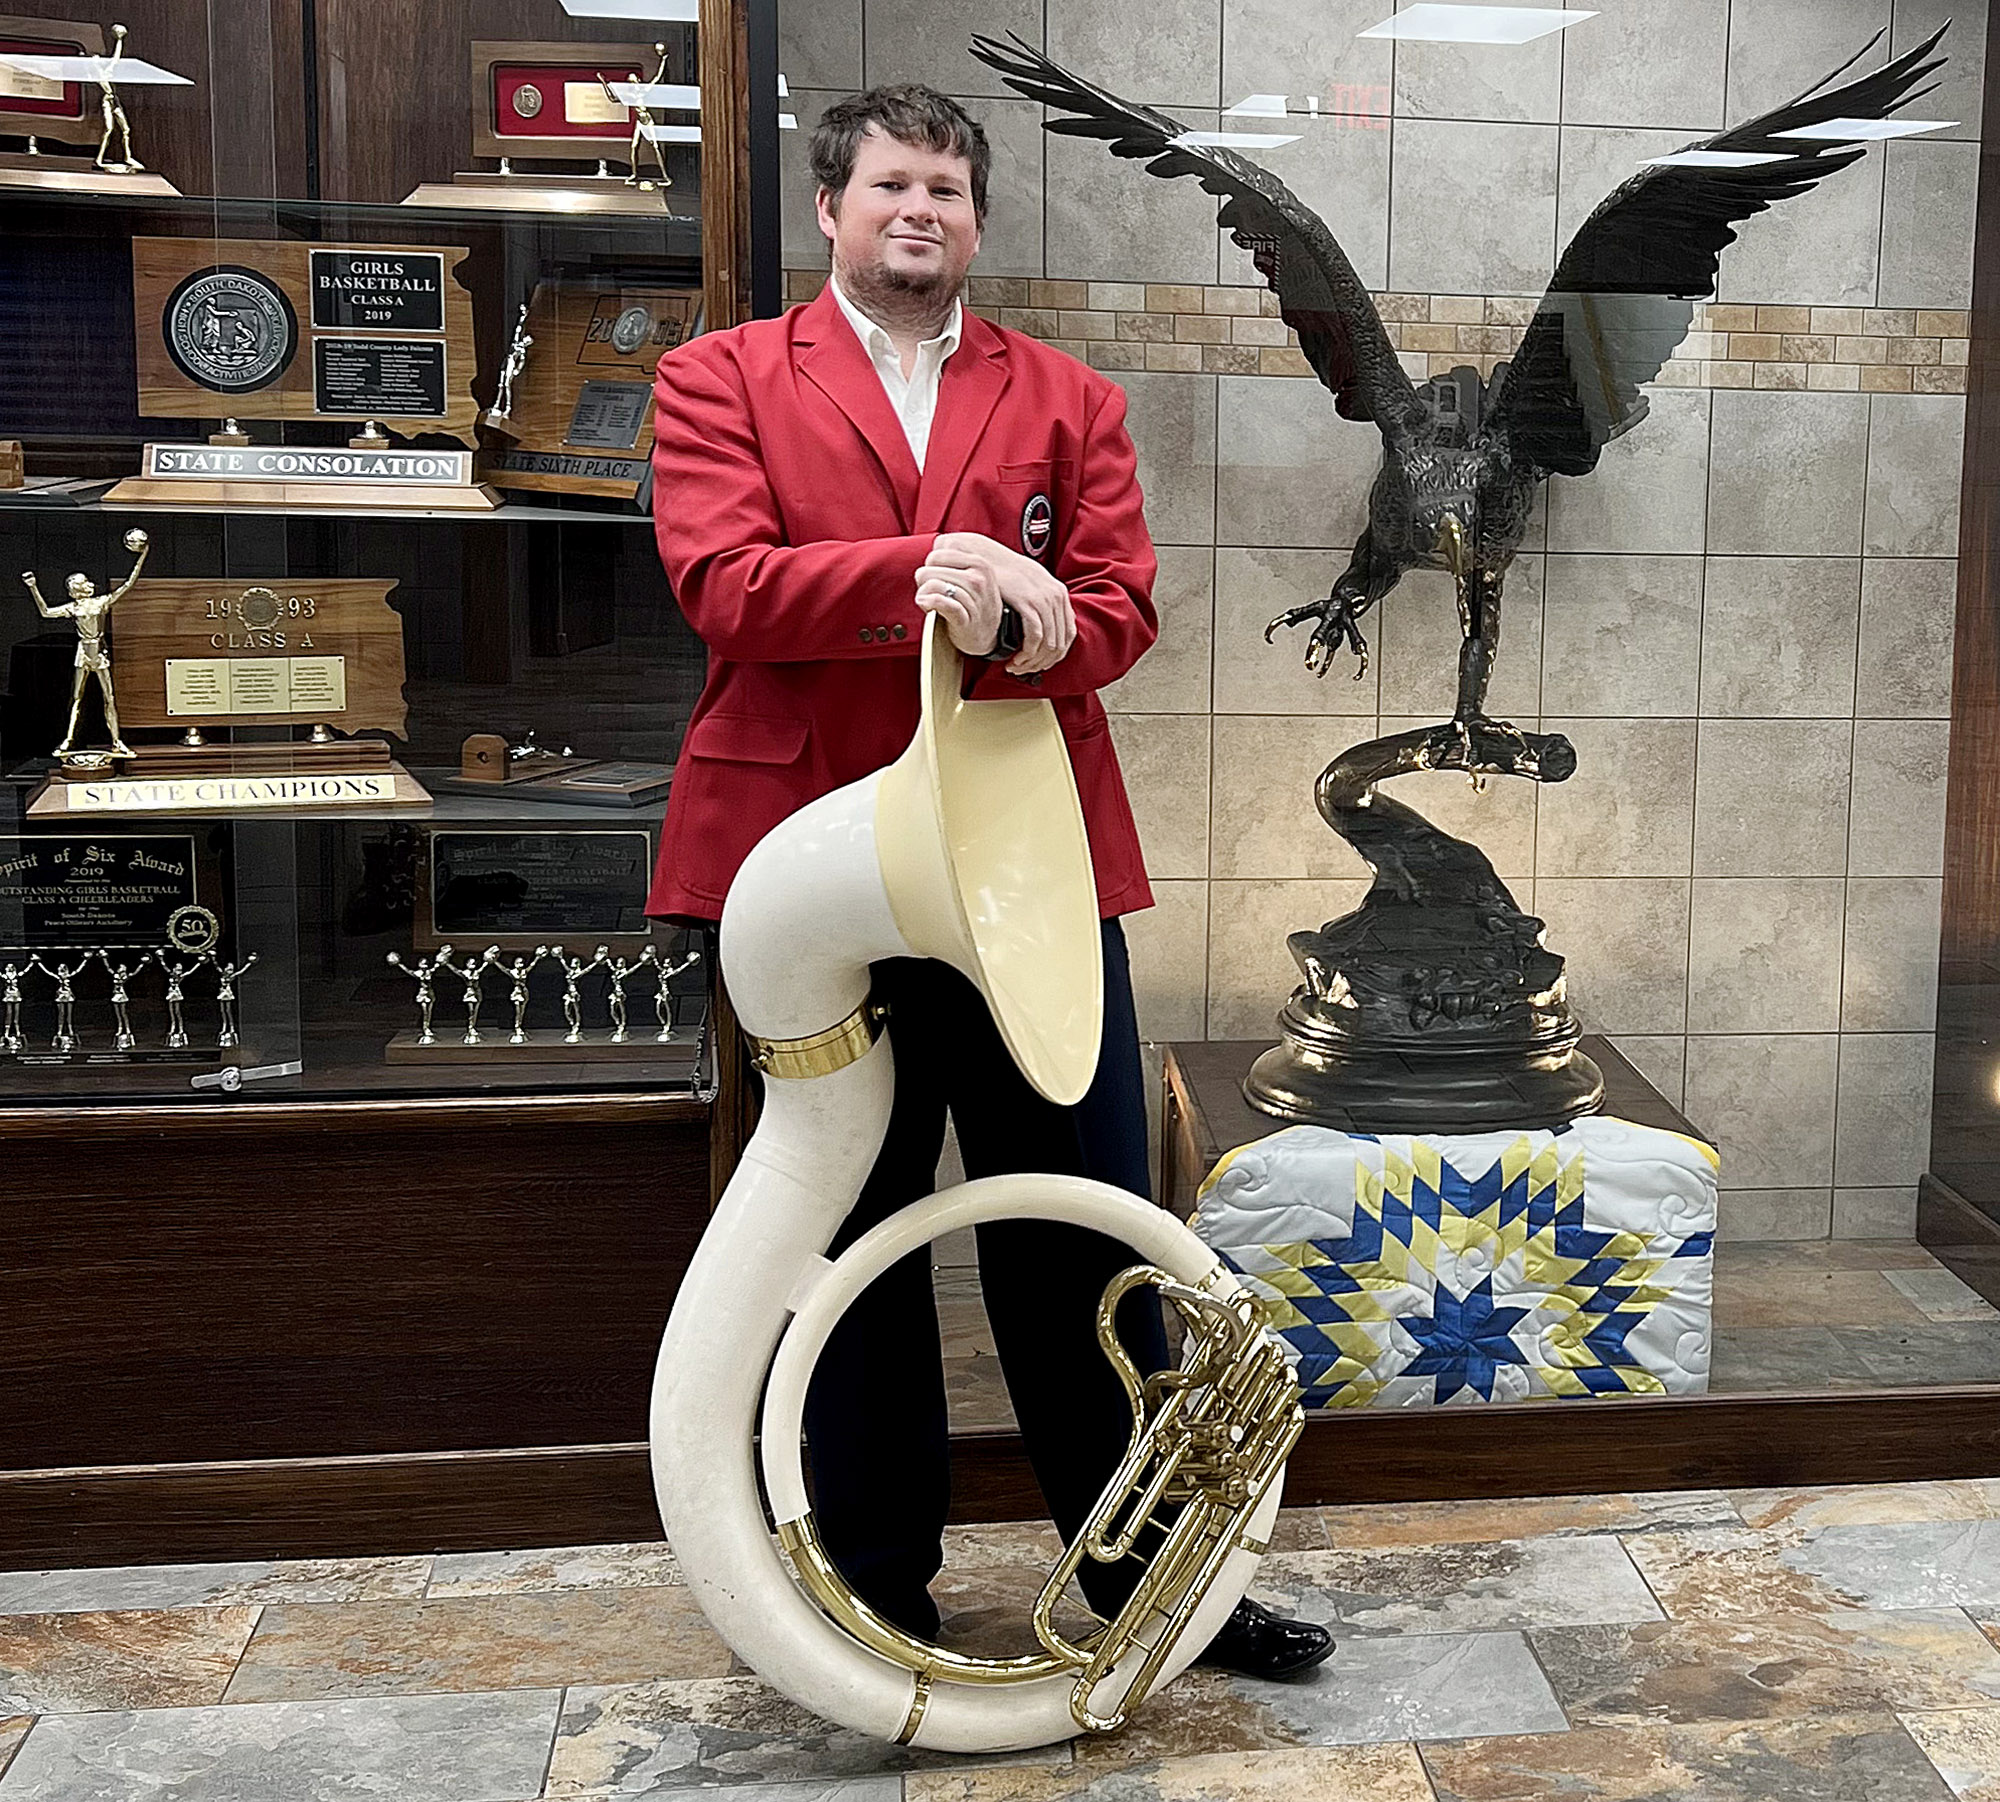 A UNK graduate and music teacher at Todd County High School in South Dakota, Brock Persson will perform during the Macy’s Thanksgiving Day Parade in New York City. (Courtesy photo)